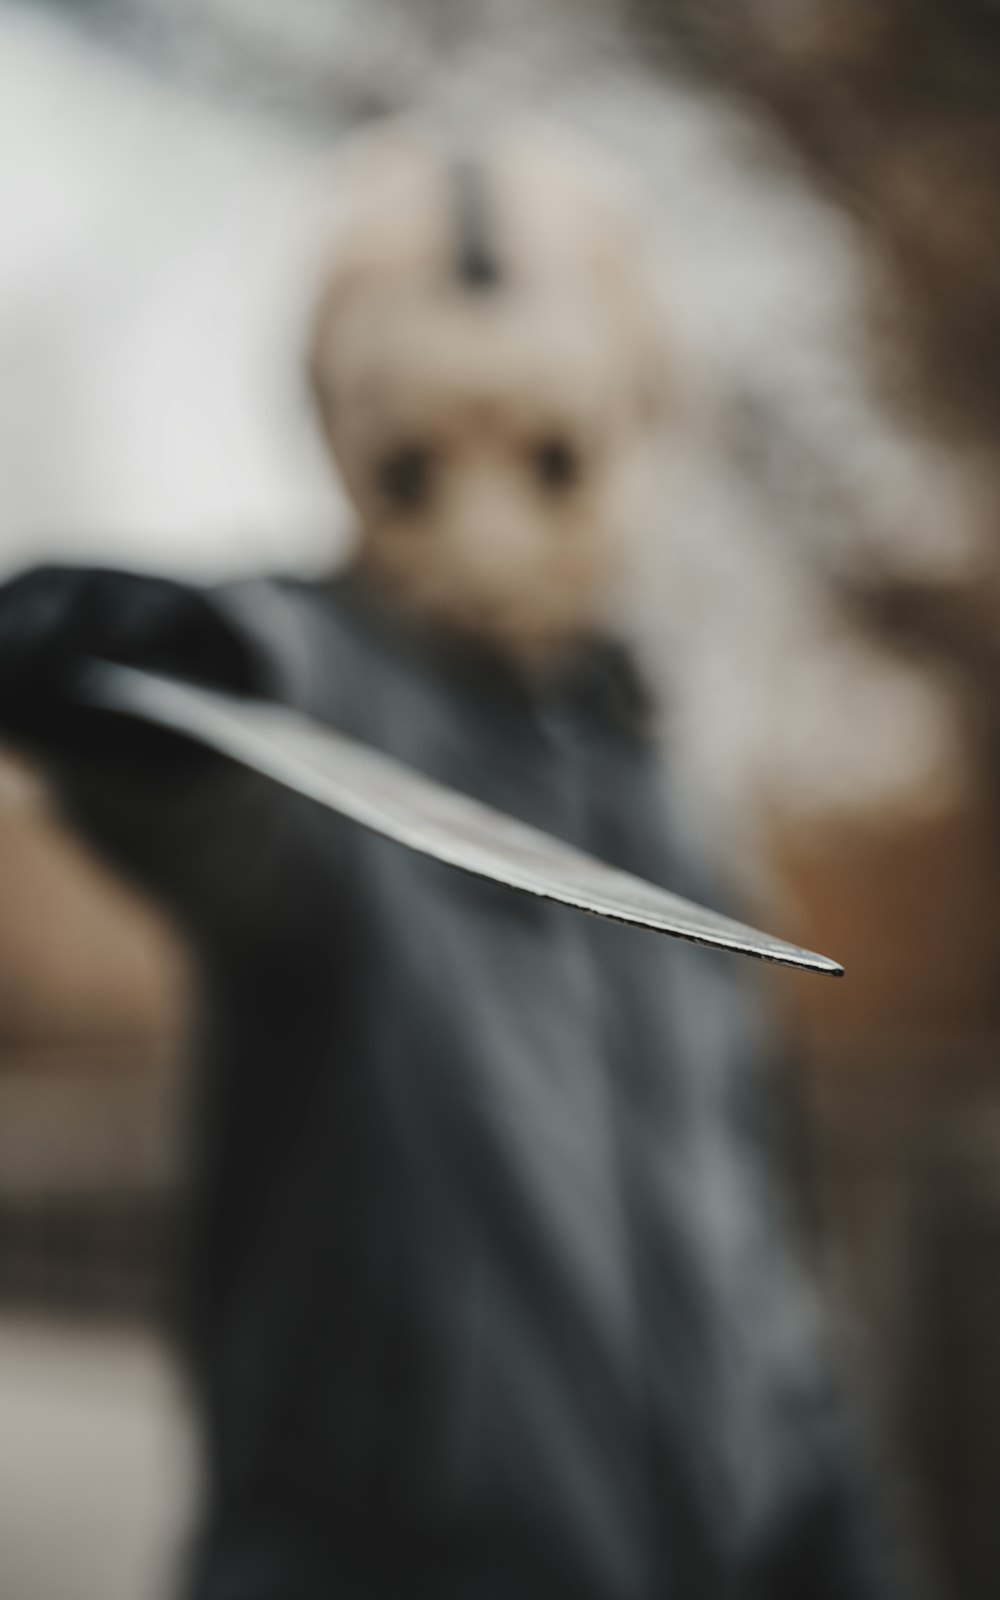 a blurry image of a person holding a knife